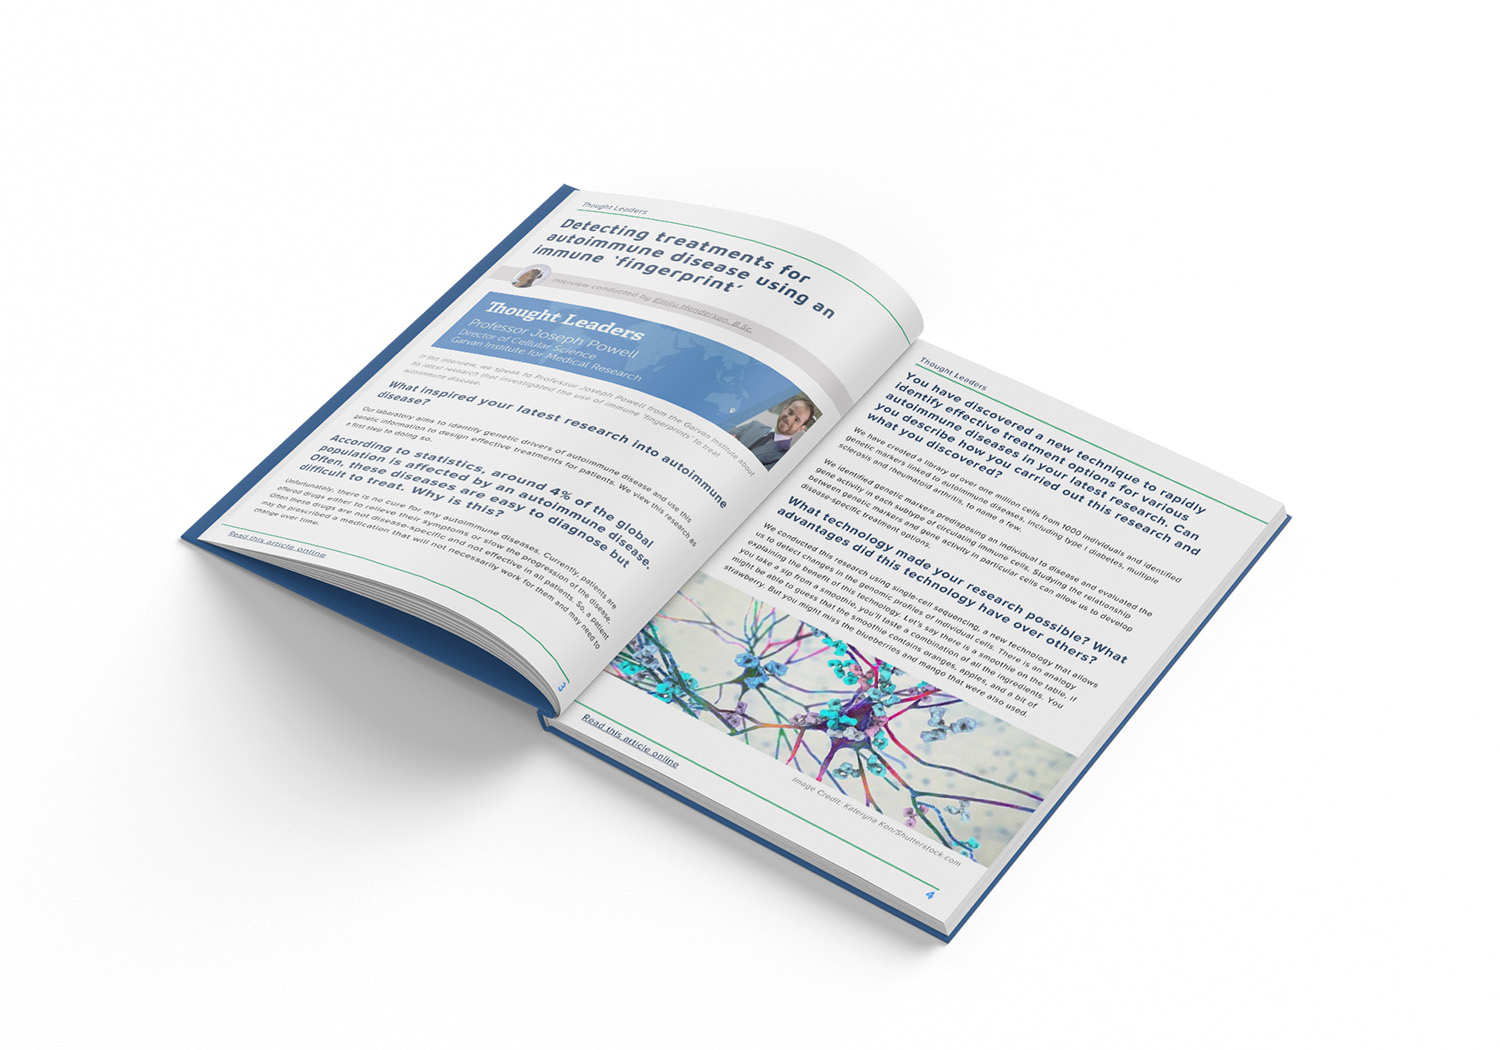 Industry Focus eBook Contents: Drug Discovery